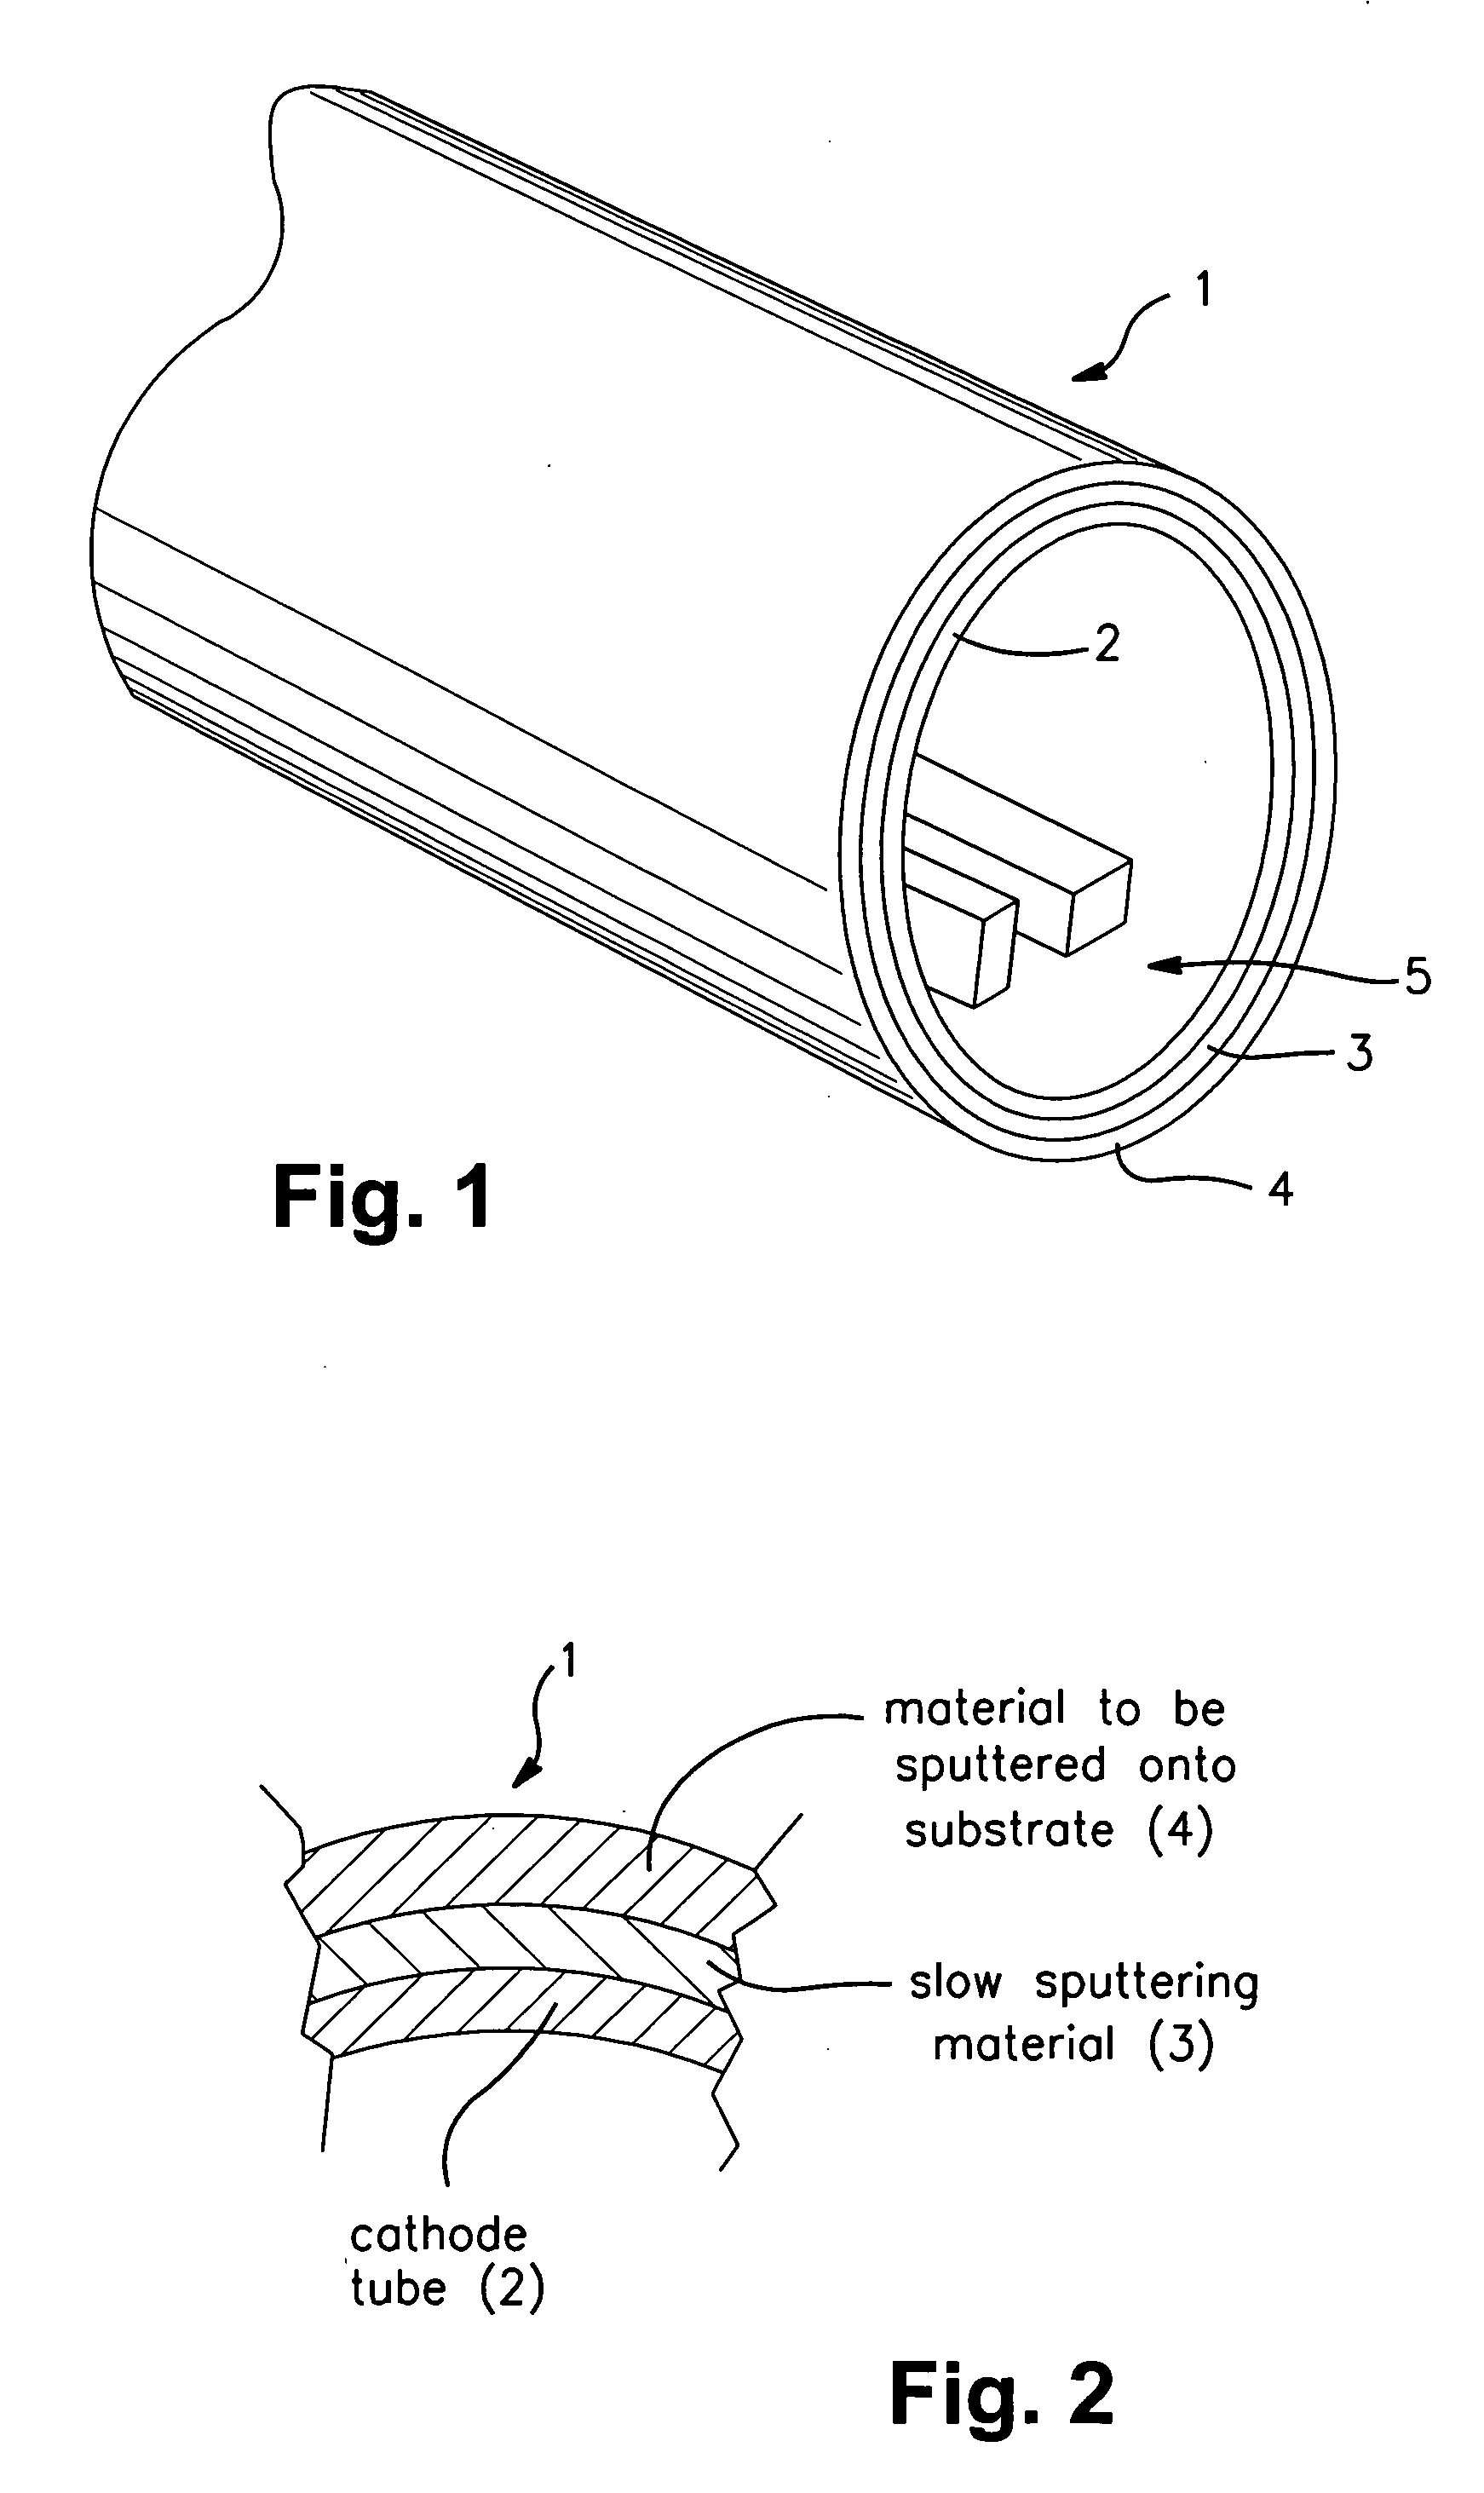 Sputtering target with slow-sputter layer under target material